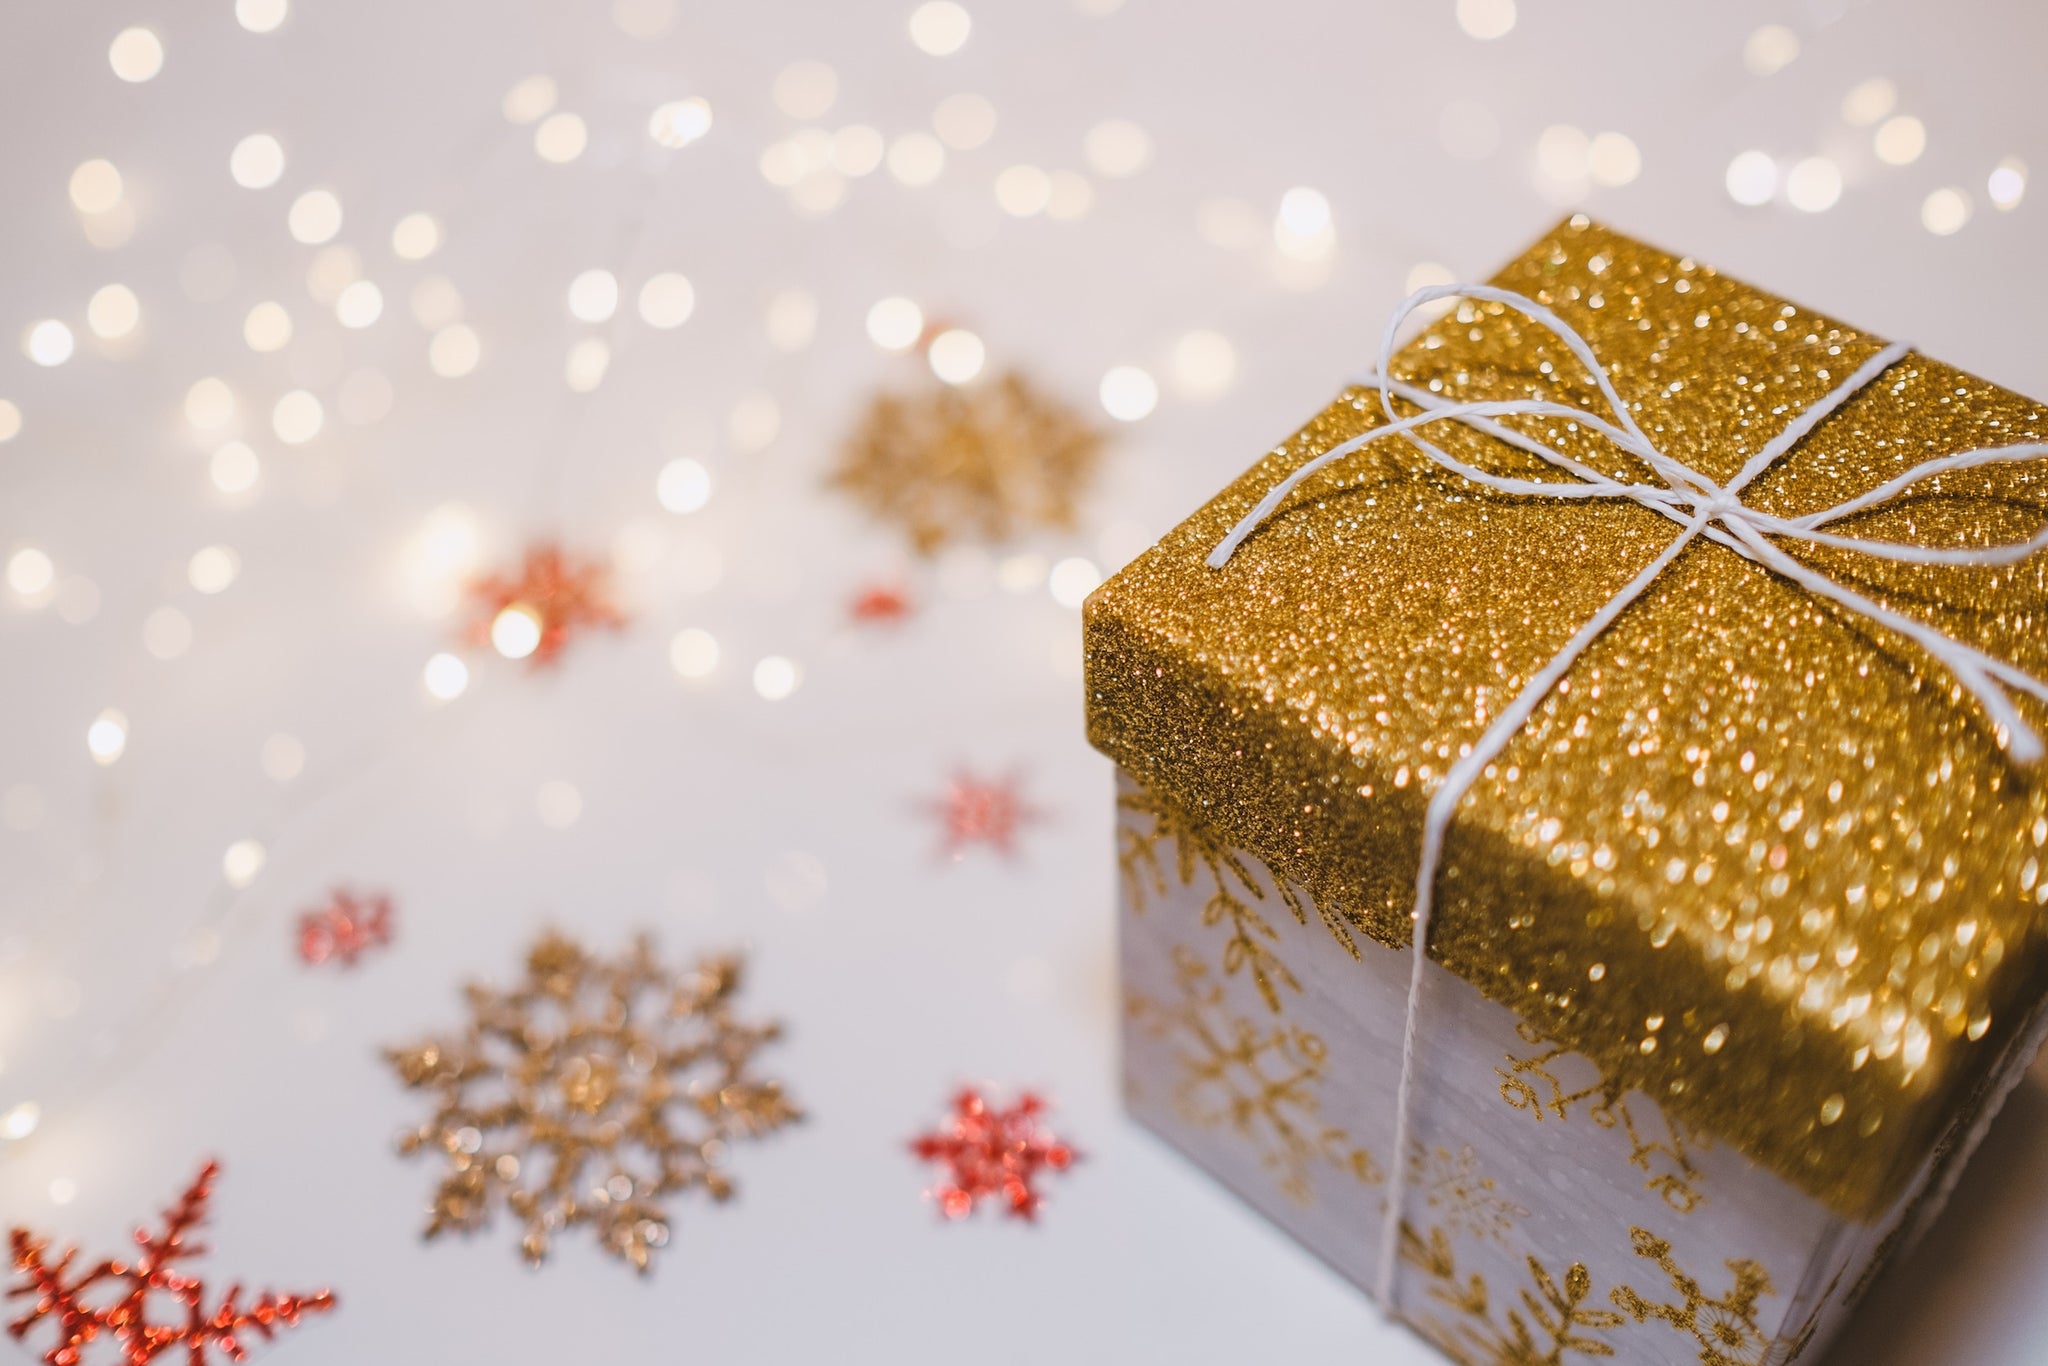 Sending segmented emails for your holiday campaigns